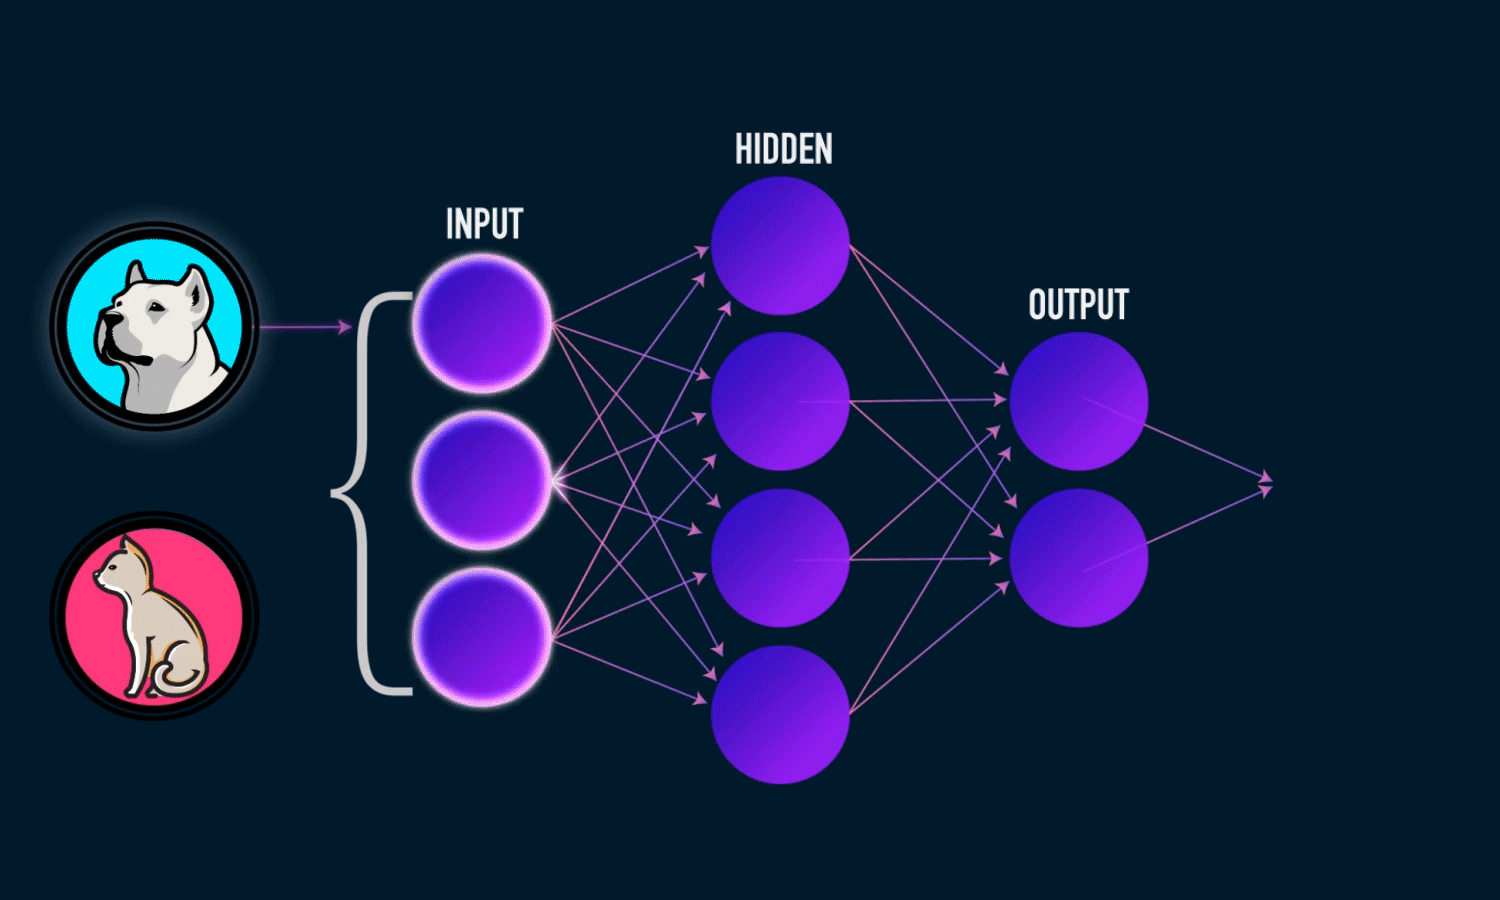 introduction to deep learning